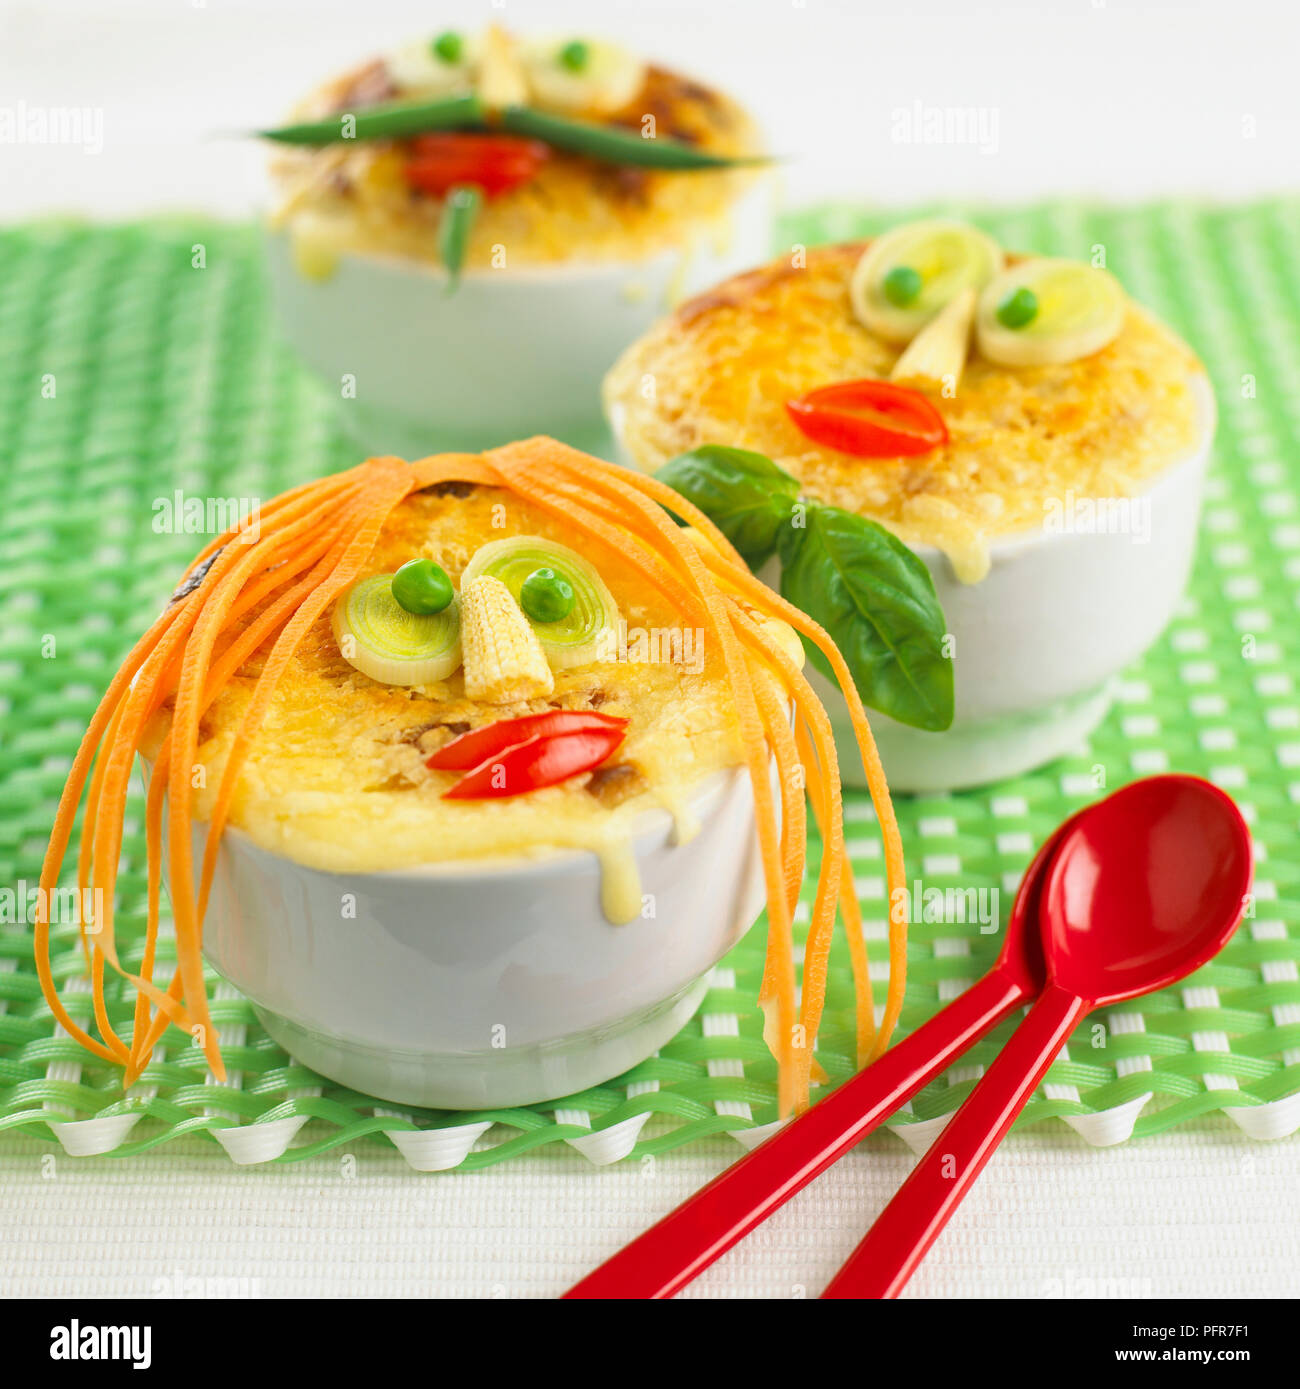 Child's potato and leek pies decorated with funny faces in white bowls, on place mat Stock Photo